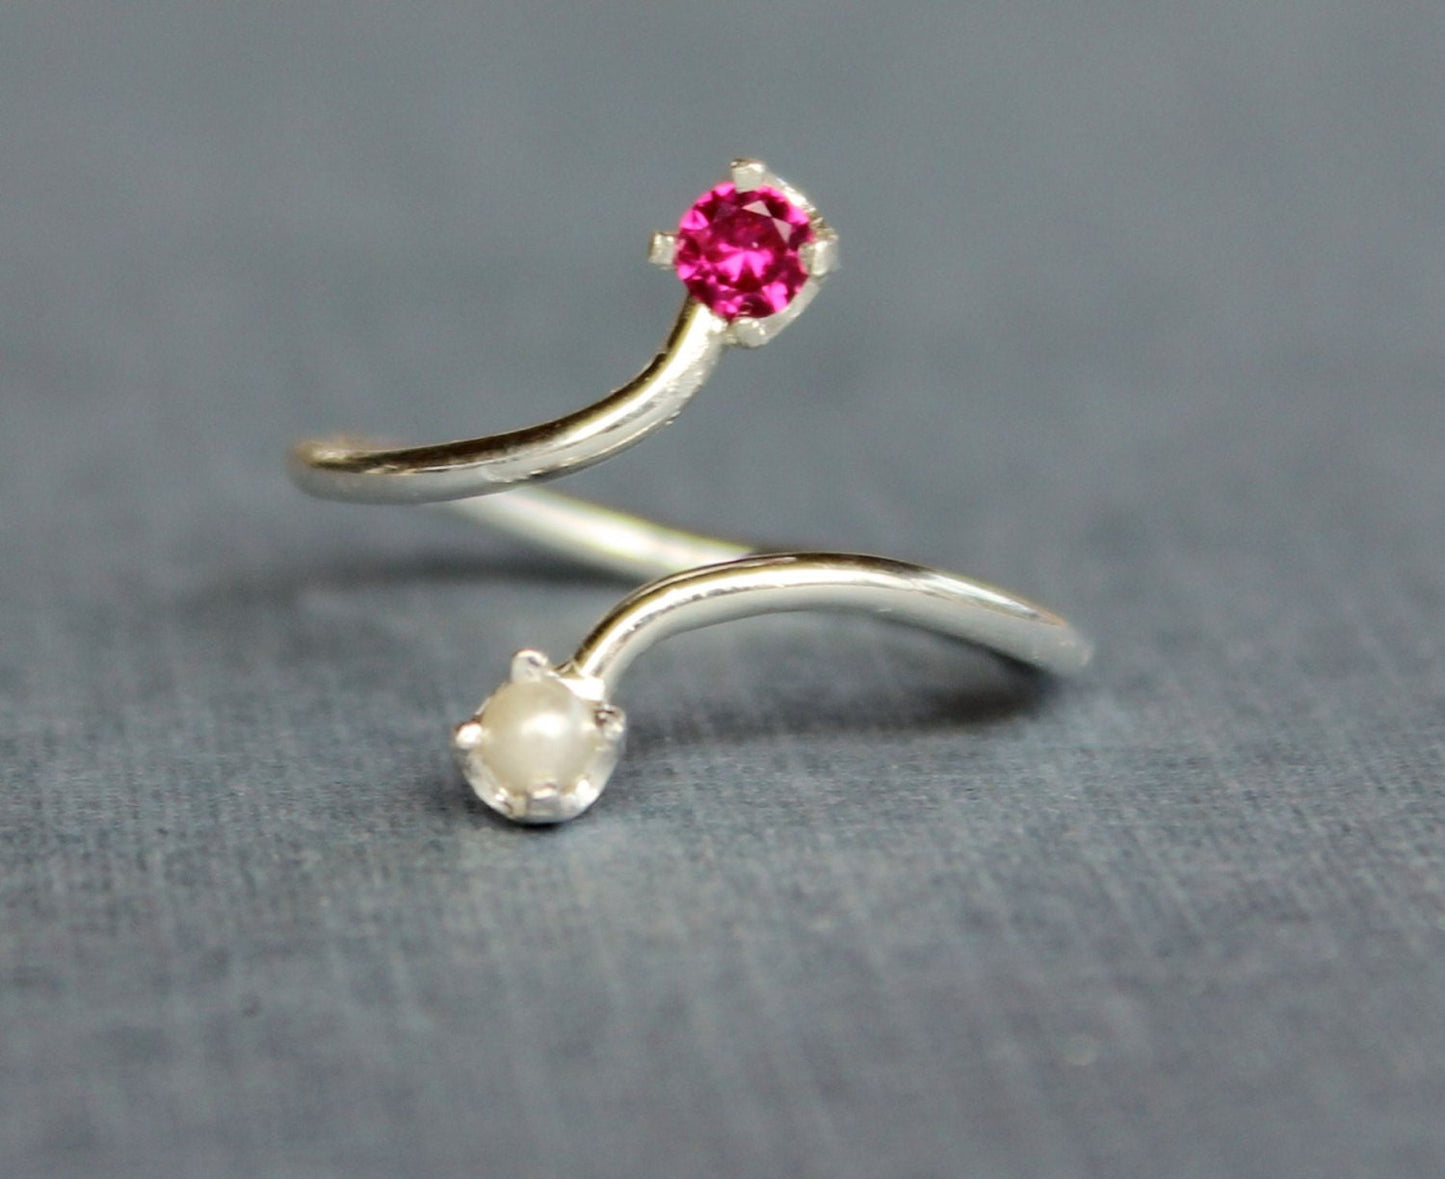 Dual Birthstone Ring - Ruby and Swarovski Pearl Ring - Sterling Silver Ring -Double Birthstone Ring - Ruby and Pearl